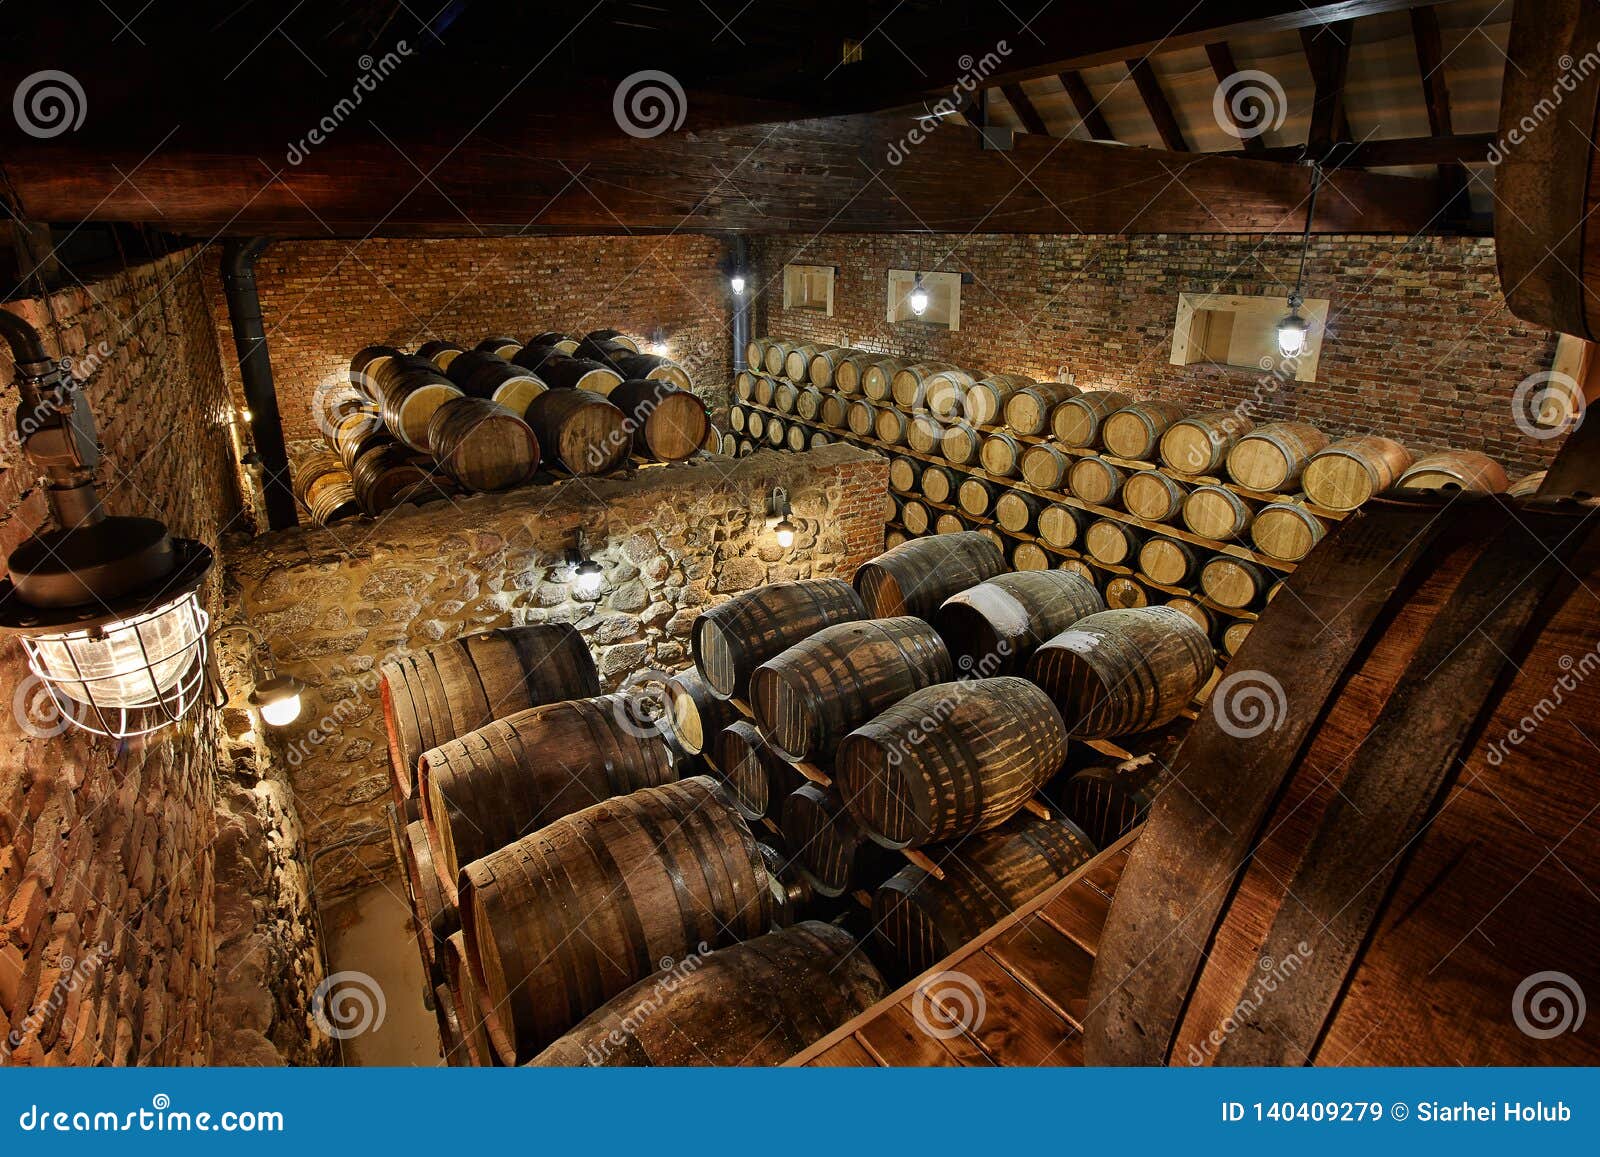 rows of alcoholic drums in stock. distillery. cognac, whiskey, wine, brandy. alcohol in barrels